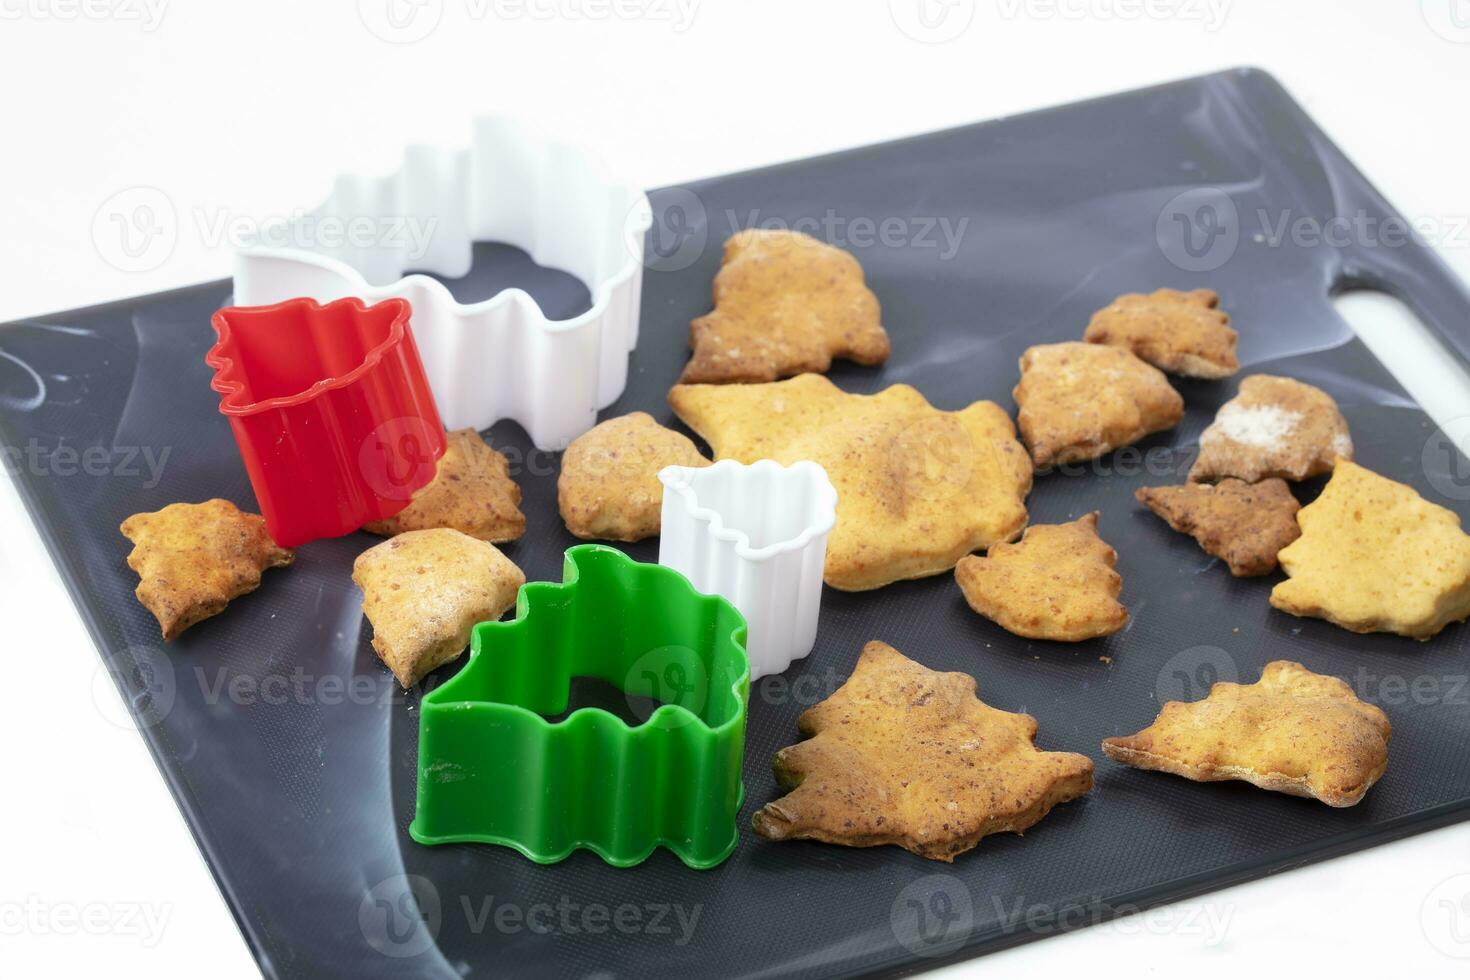 On a cutting board there are Christmas tree-shaped cookies and colored baking dishes. Beautiful Christmas pastries on a white background. photo